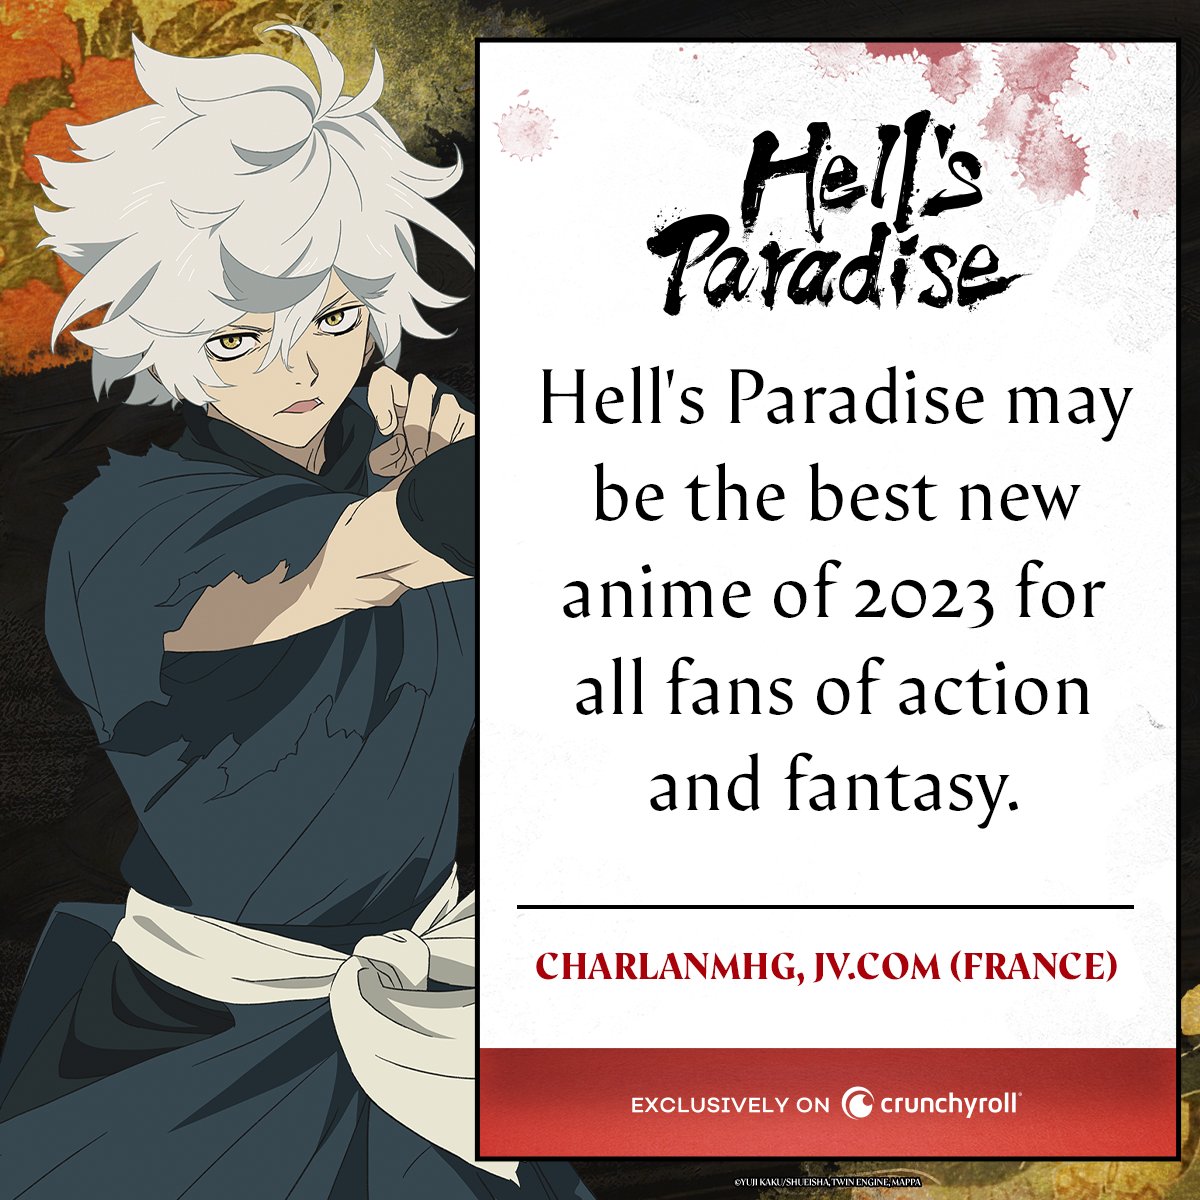 Hell's Paradise in 2023